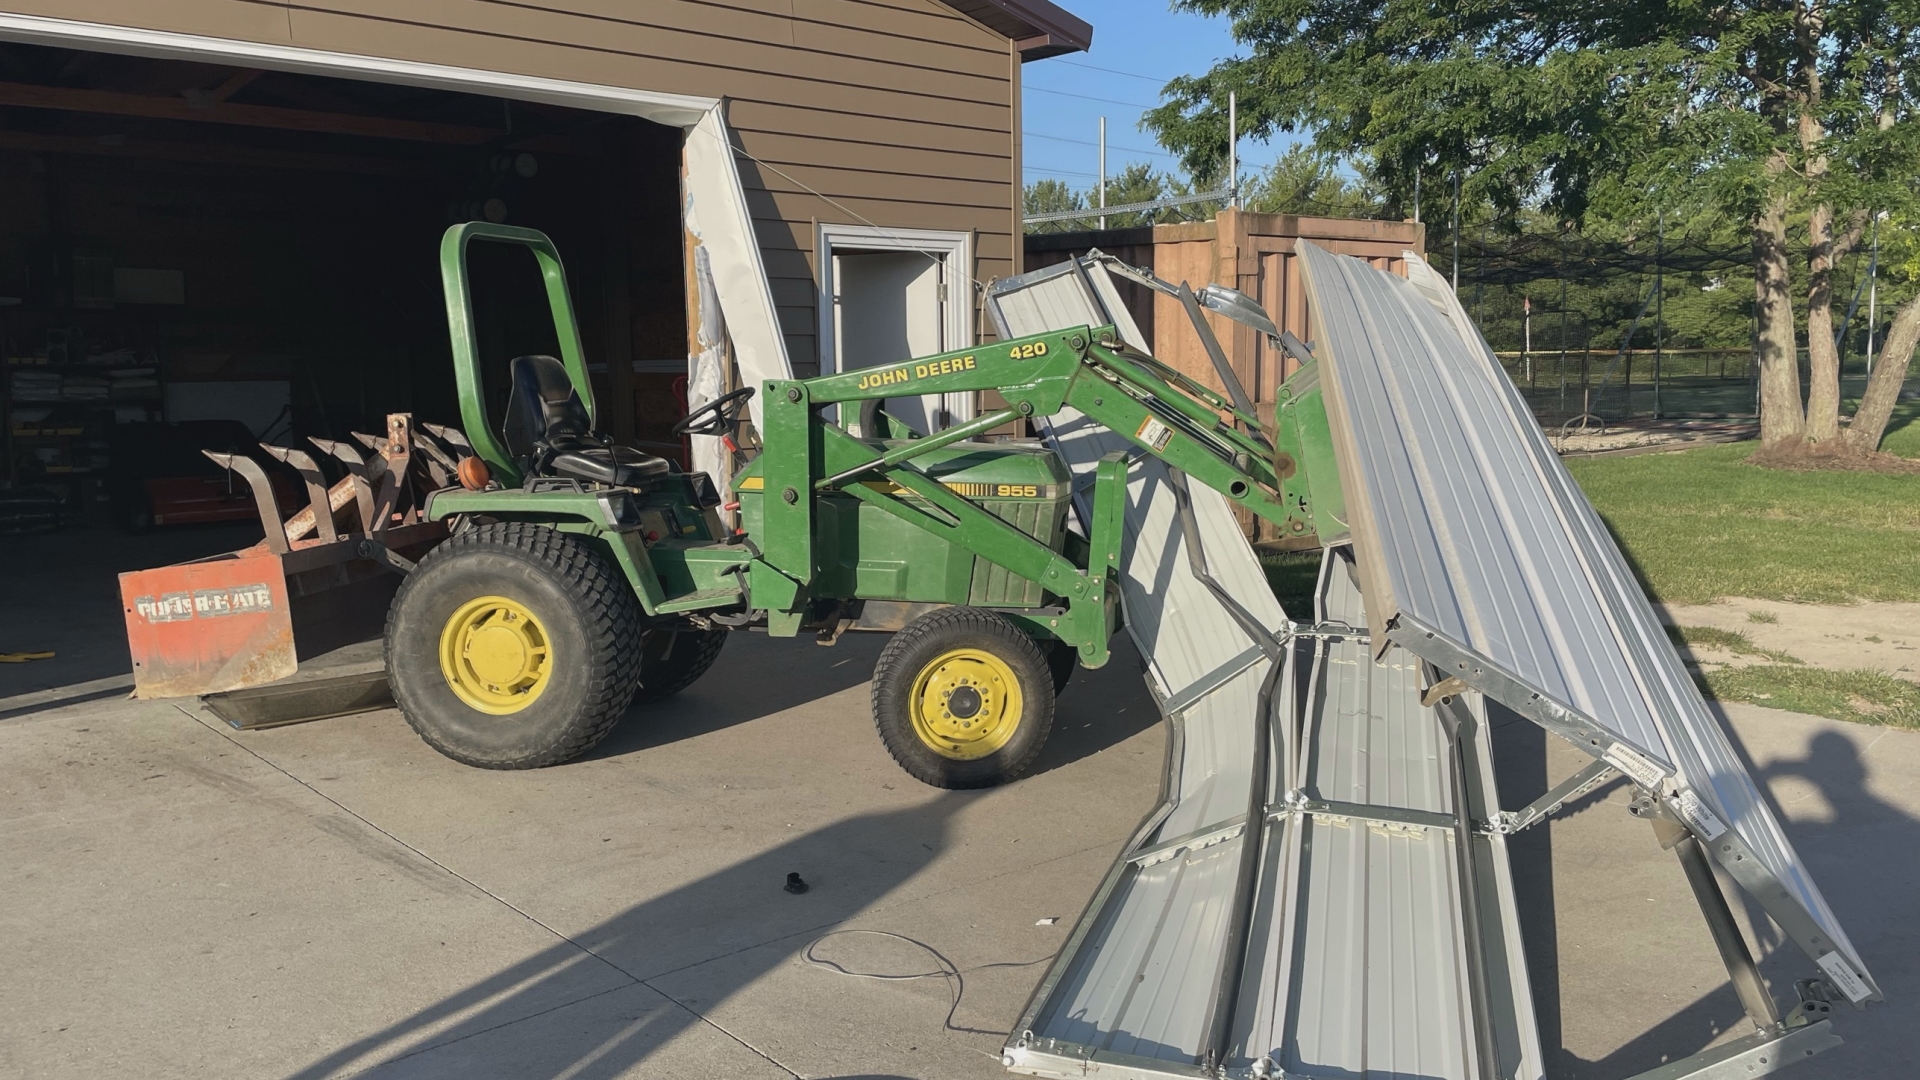 The little league's $12,000 Gator and four golf carts were returned days after being stolen, but who did it, remains under investigation by police.